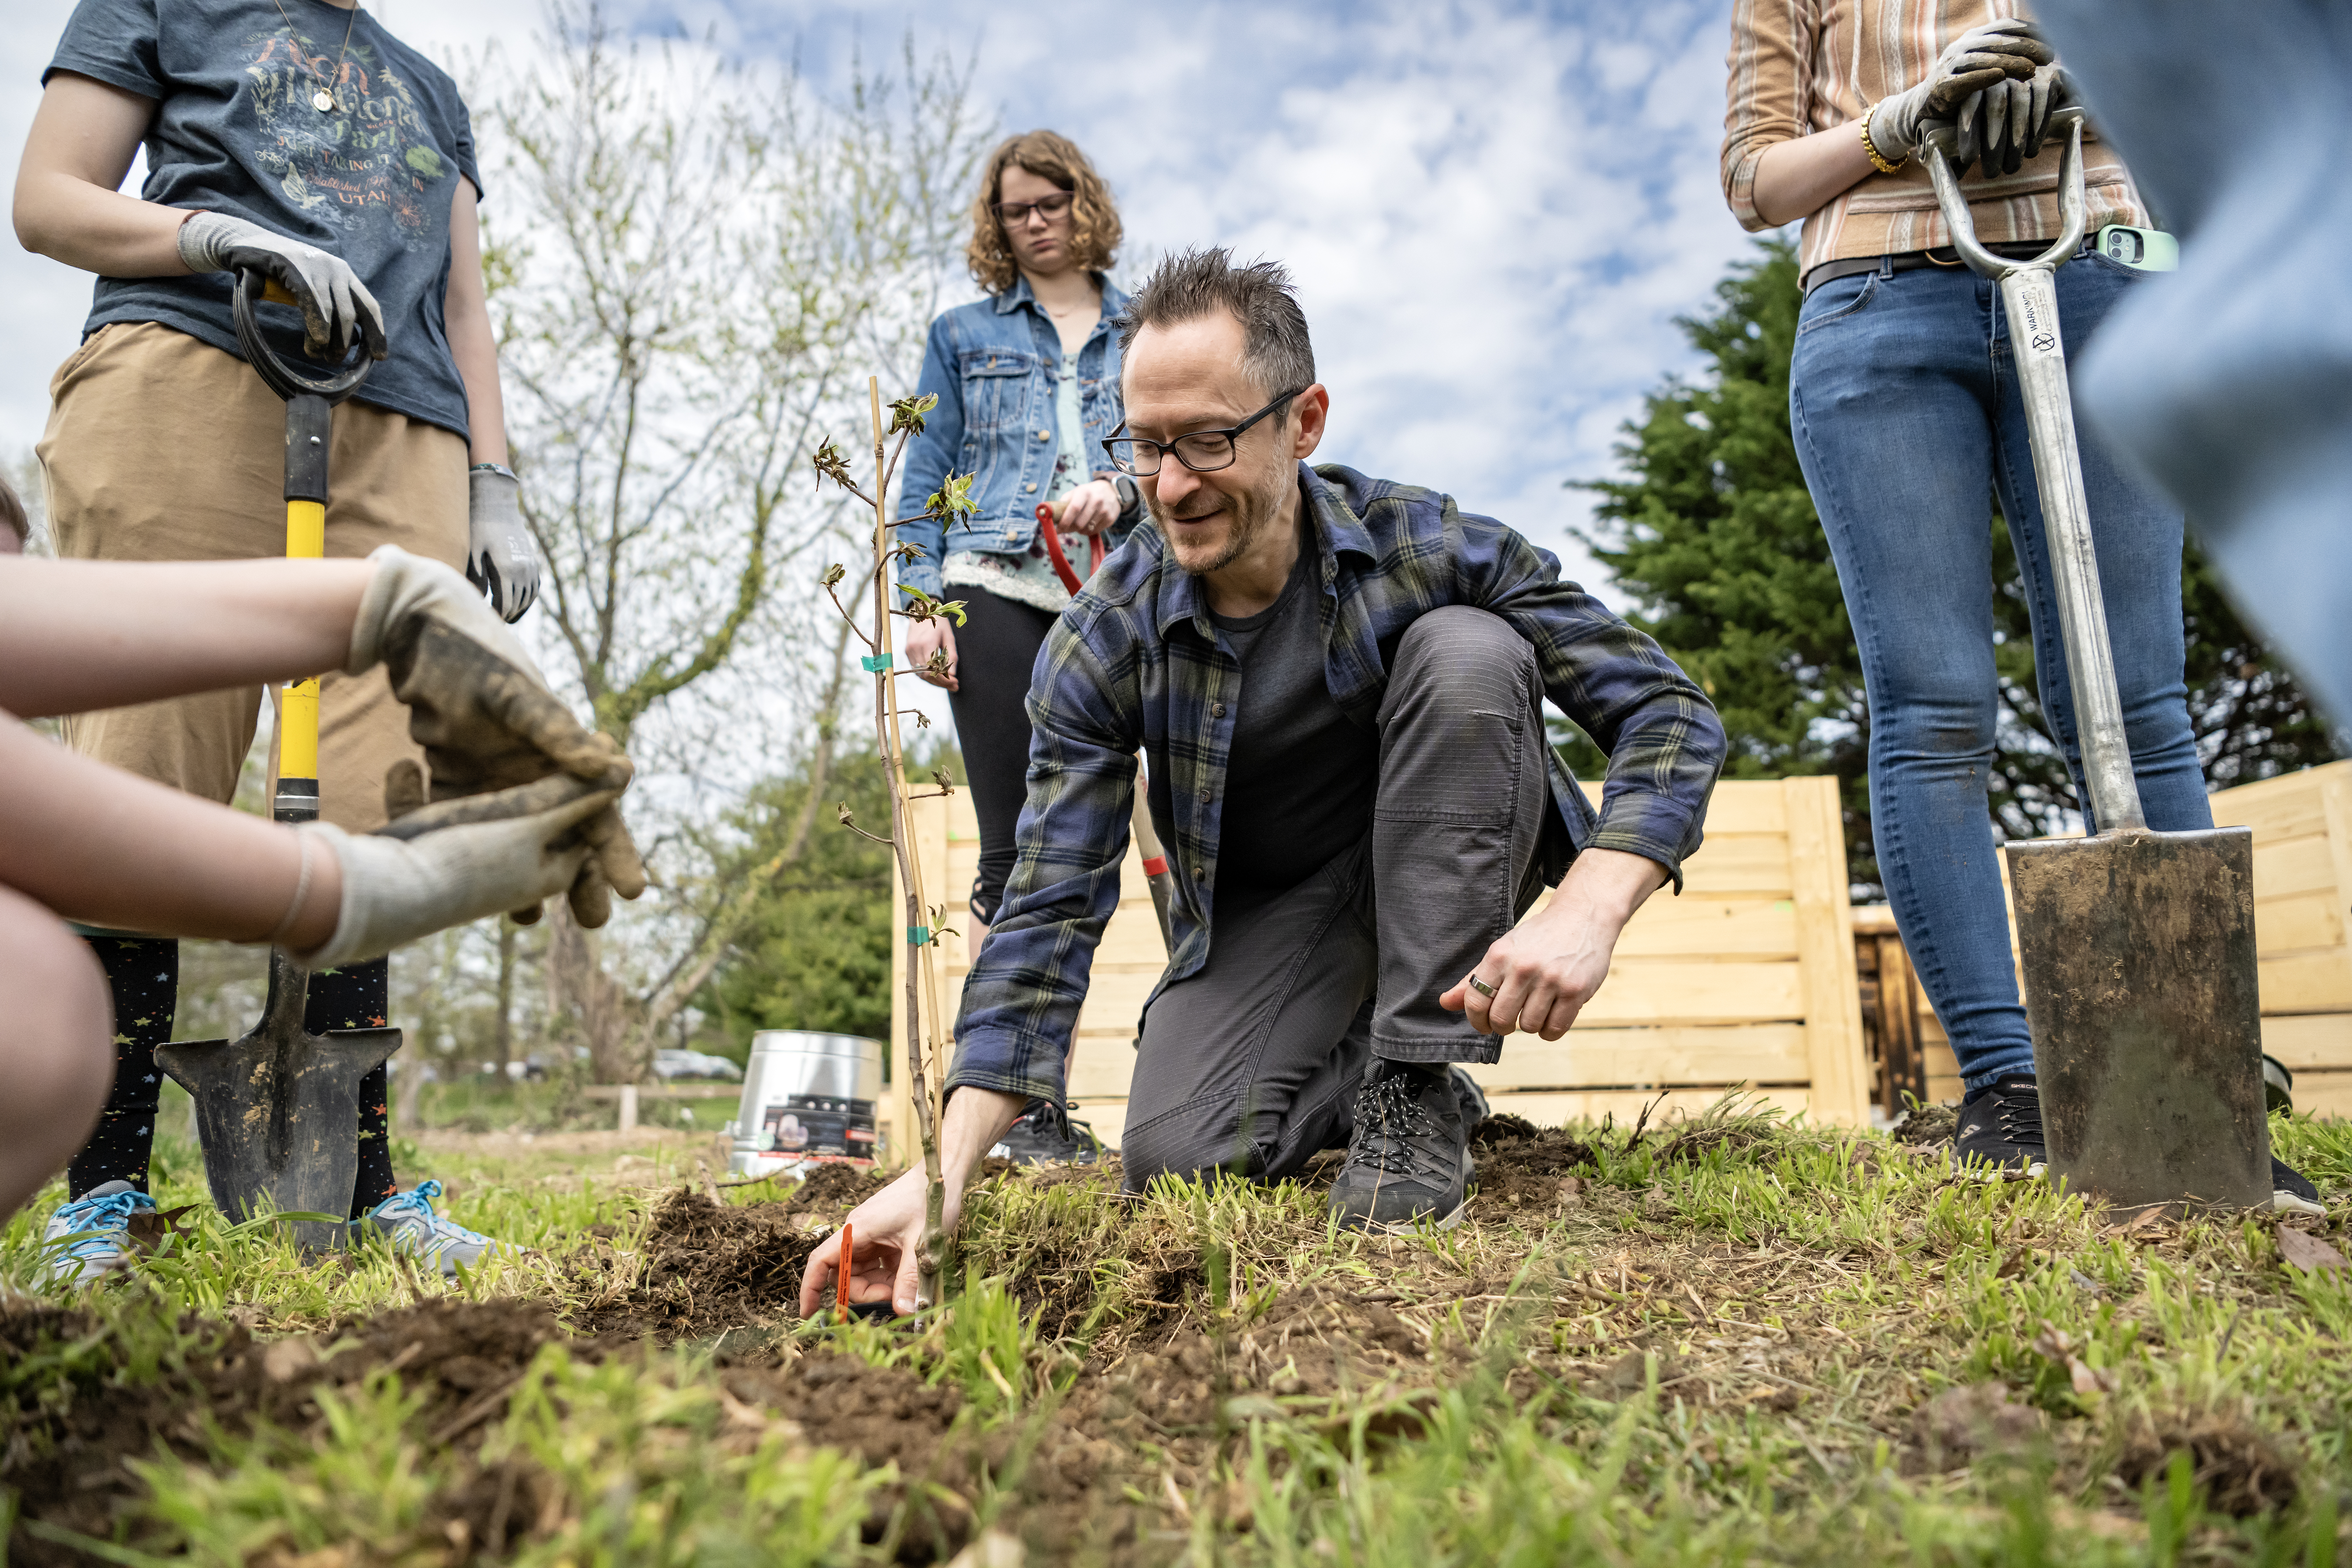 Campus Garden Director Shane Brill helps plant trees in the new Poetry Garden at Washington College.